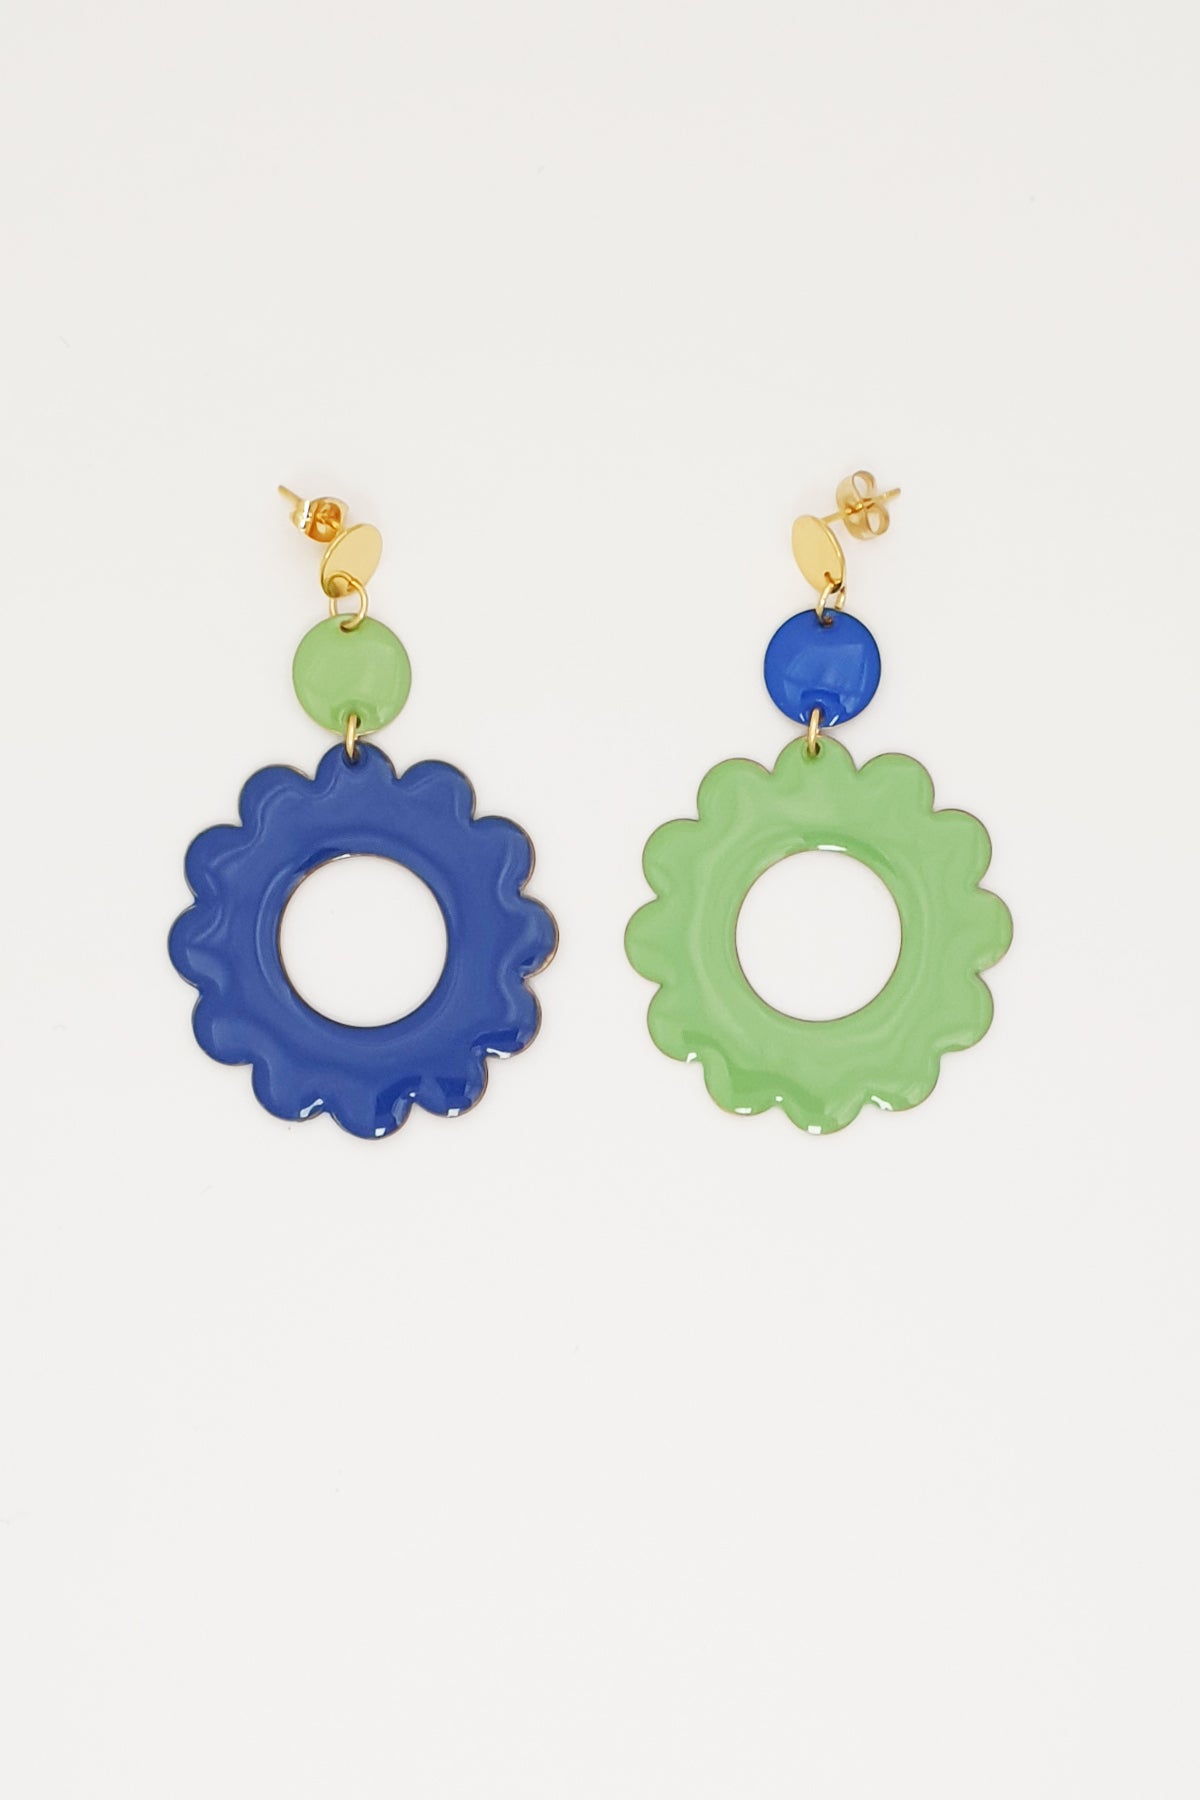 A pair of stud dangle earrings lay on white background. The left earring features a sage enamel dot connected to a larger sapphire blue enamel flower. The right earring is flipped and features an enamel sapphire blue dot connected to a larger sage enamel flower.